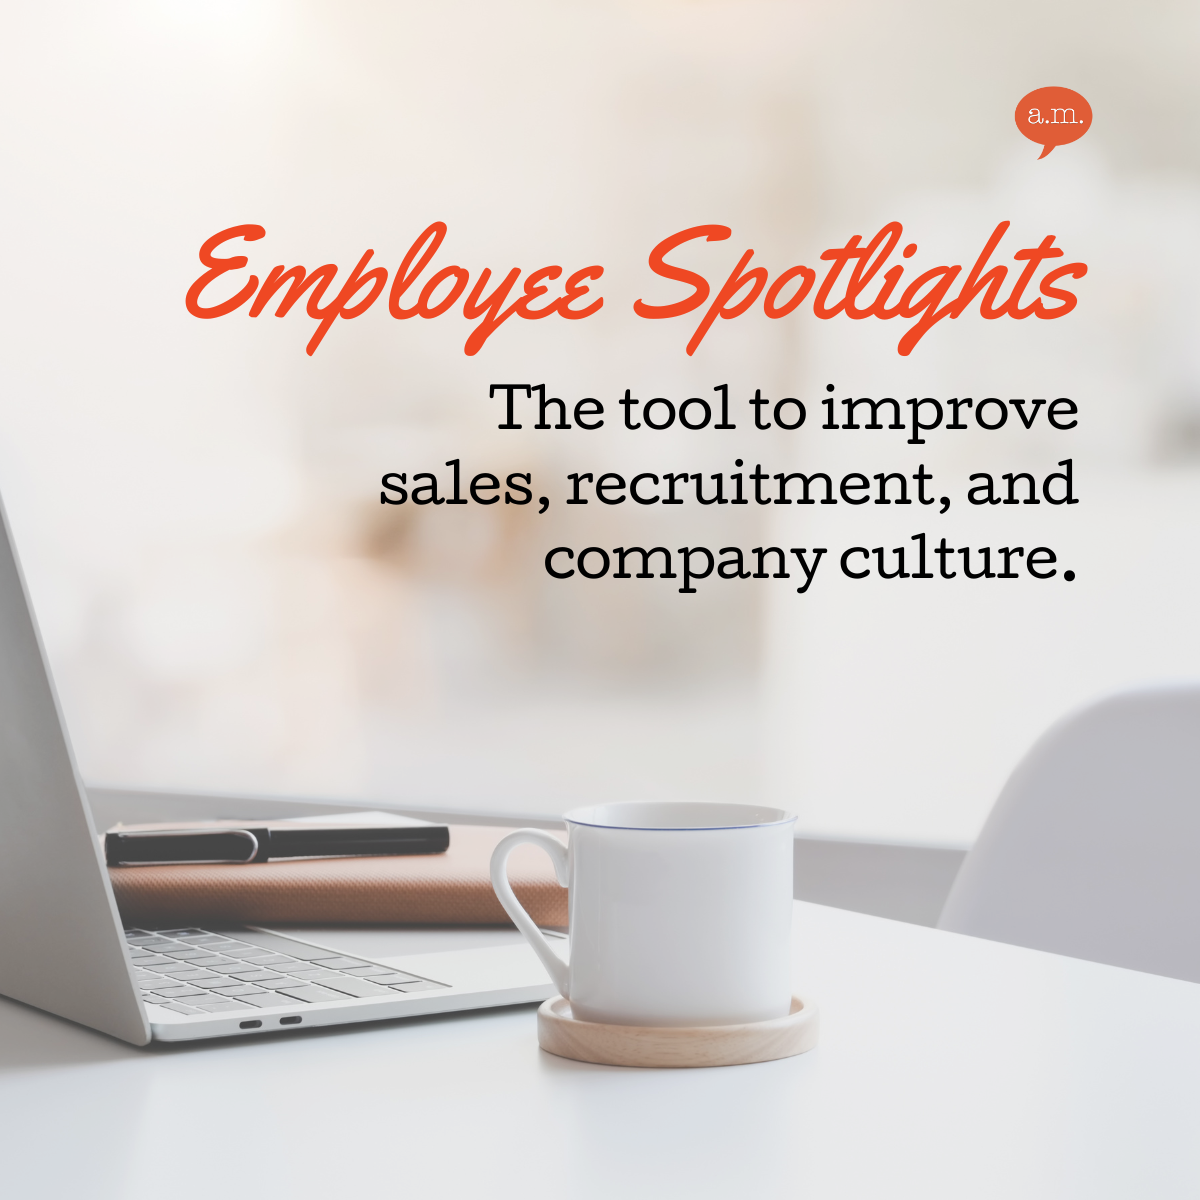 Why You Should Feature Employee Spotlights